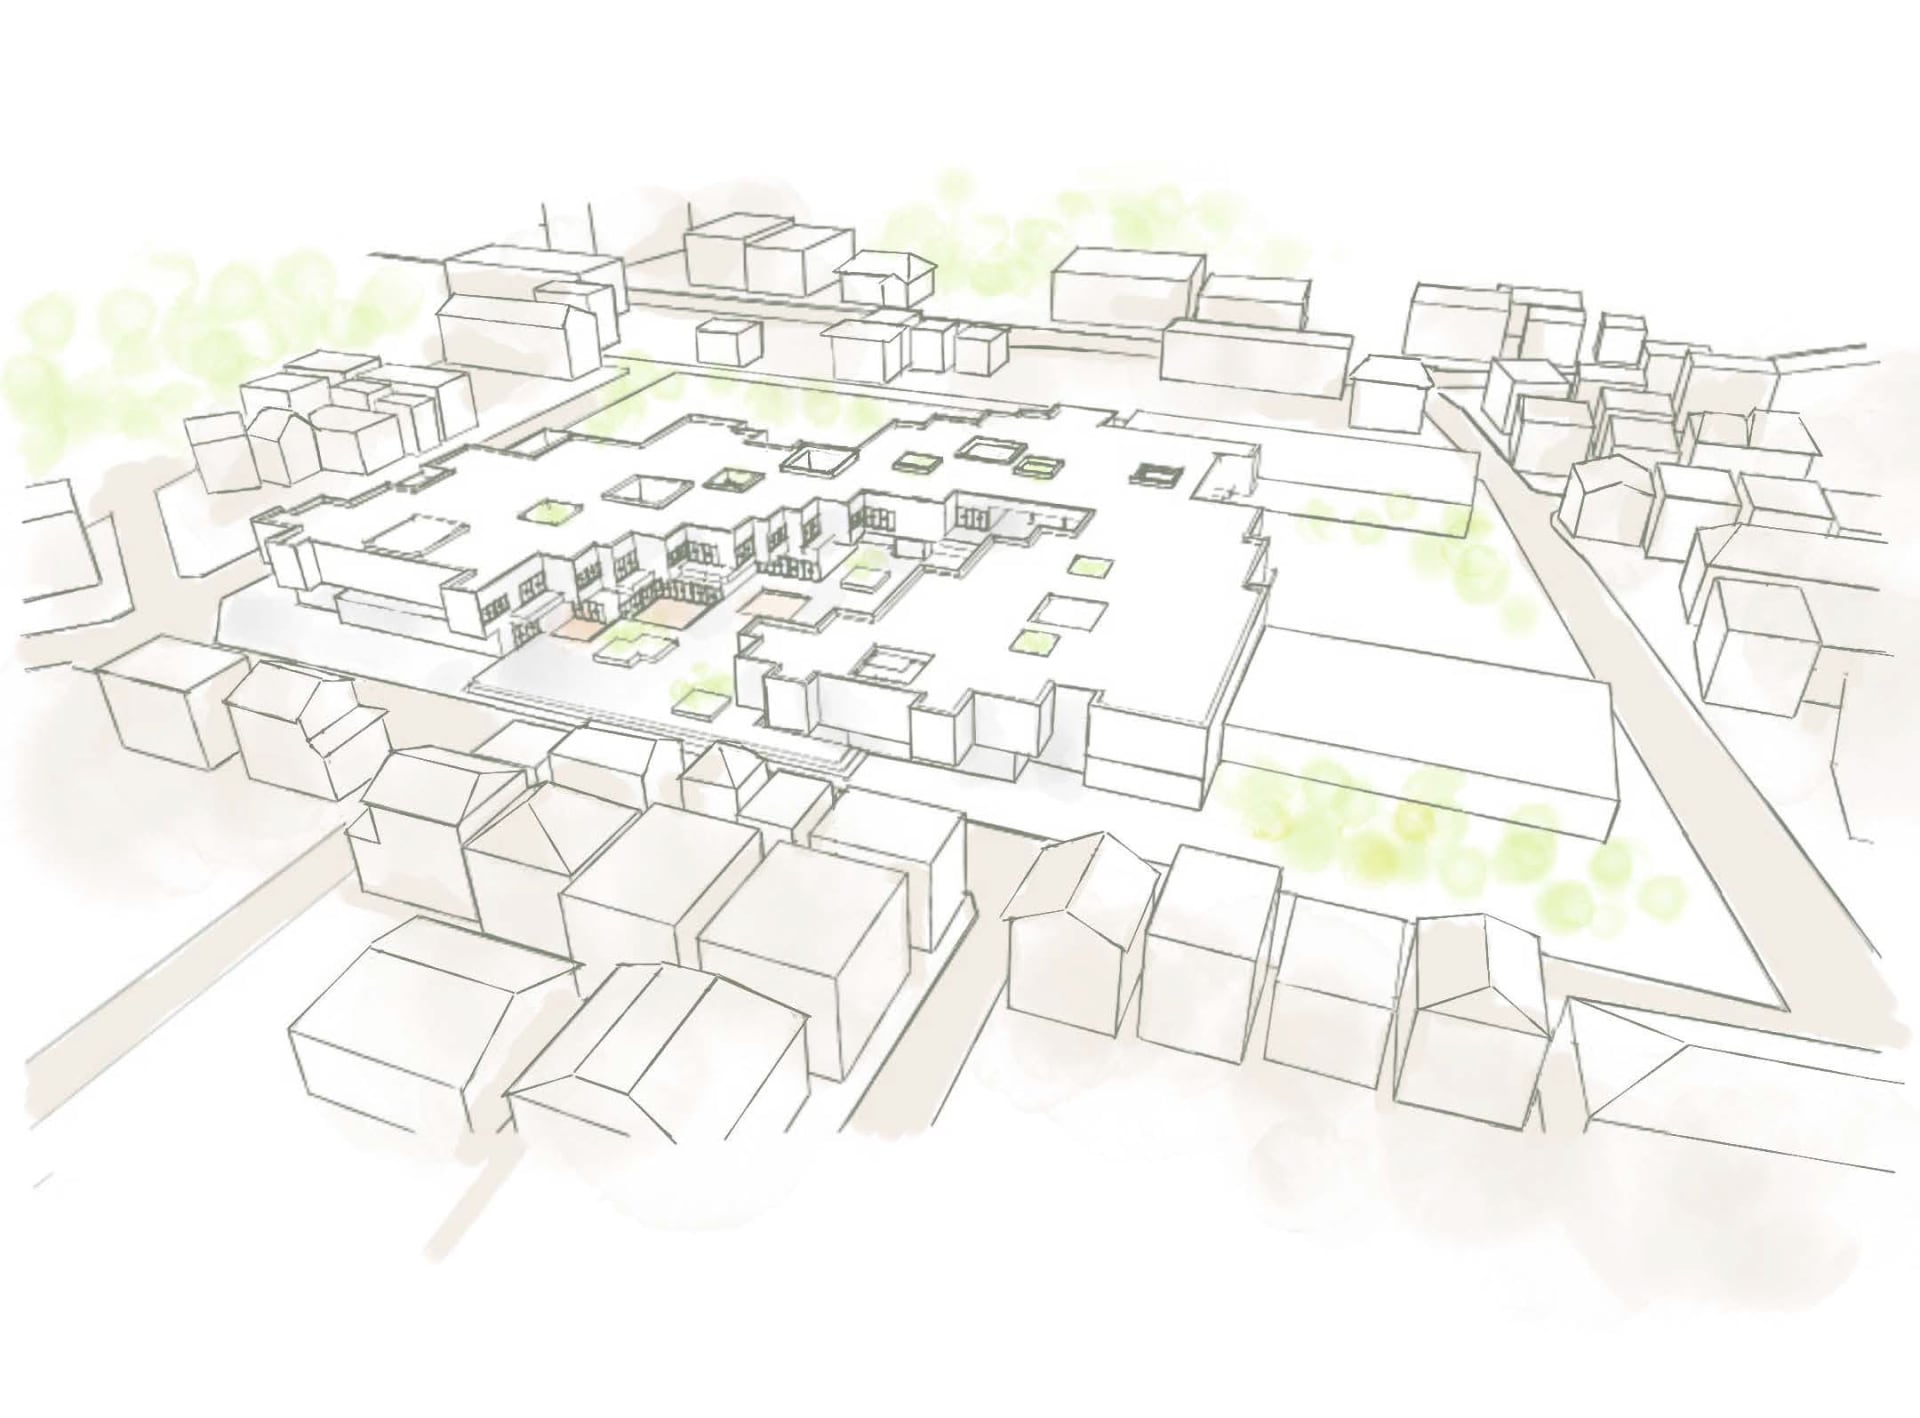 Hiregasaki - Regional Learning Place New Form of Primary School | Yusa Ito